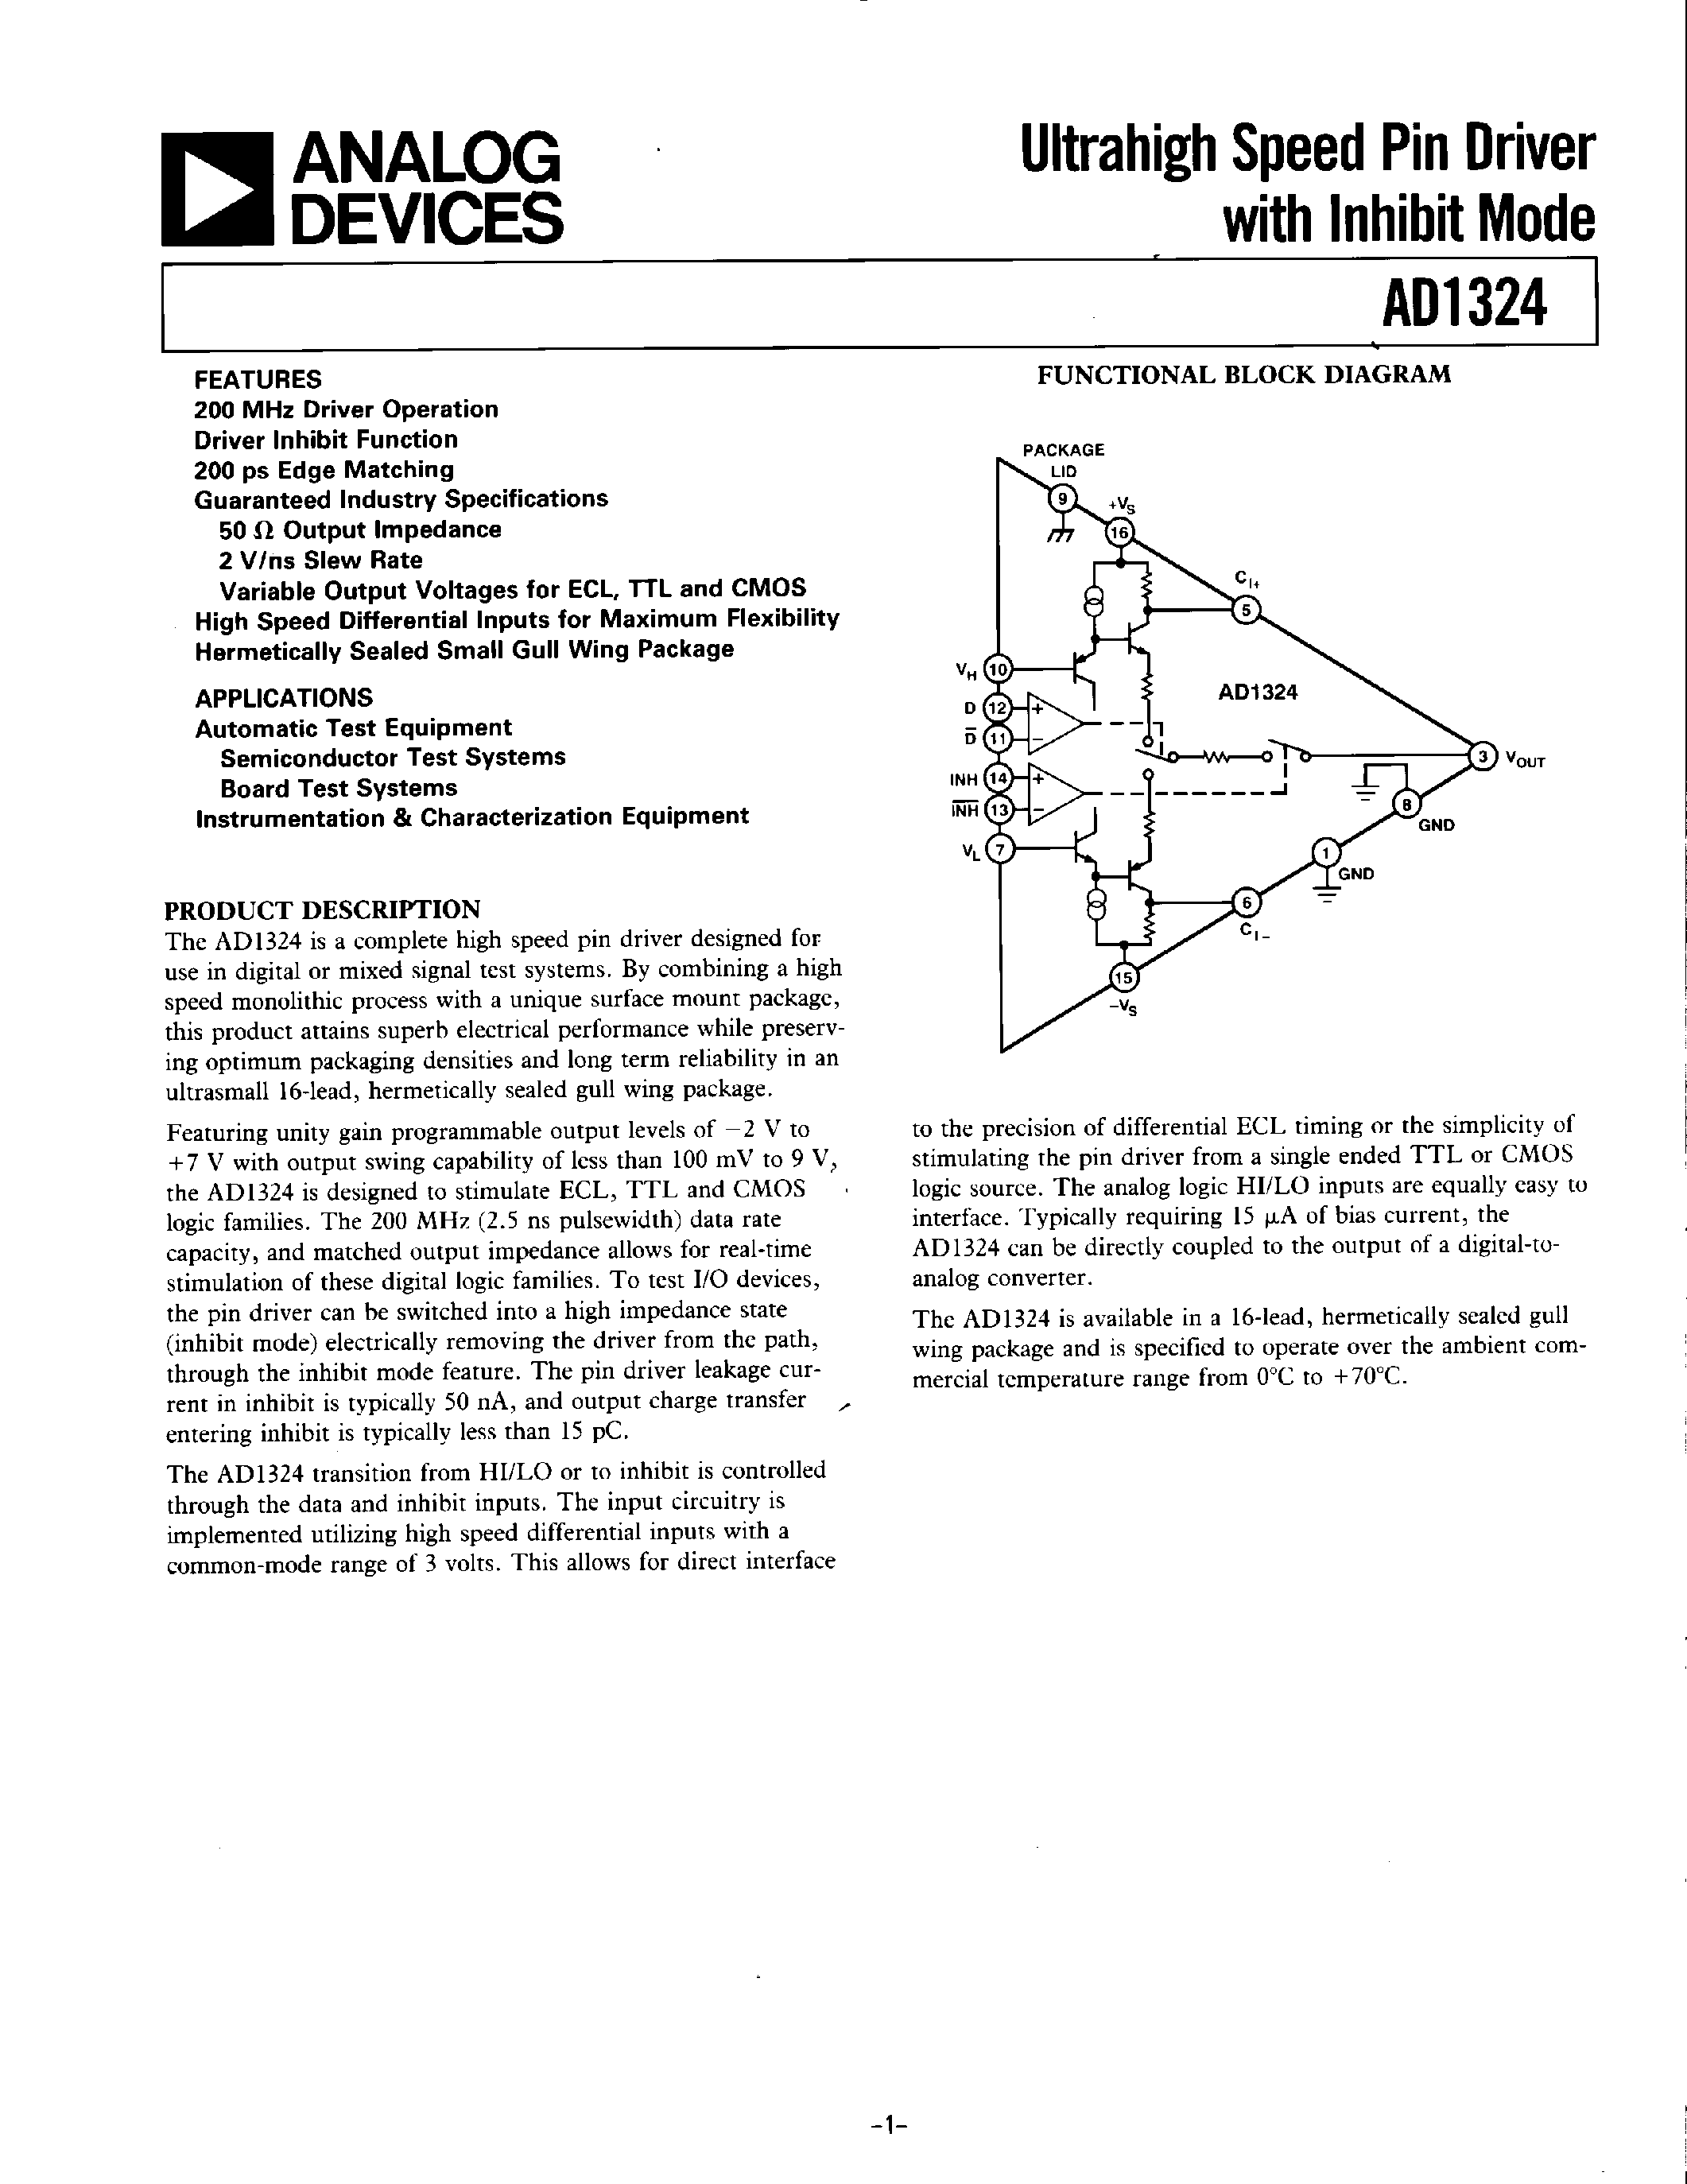 Datasheet AD1324KZ - Ultrahigh Speed Pin Driver with Inhibit Mode page 1